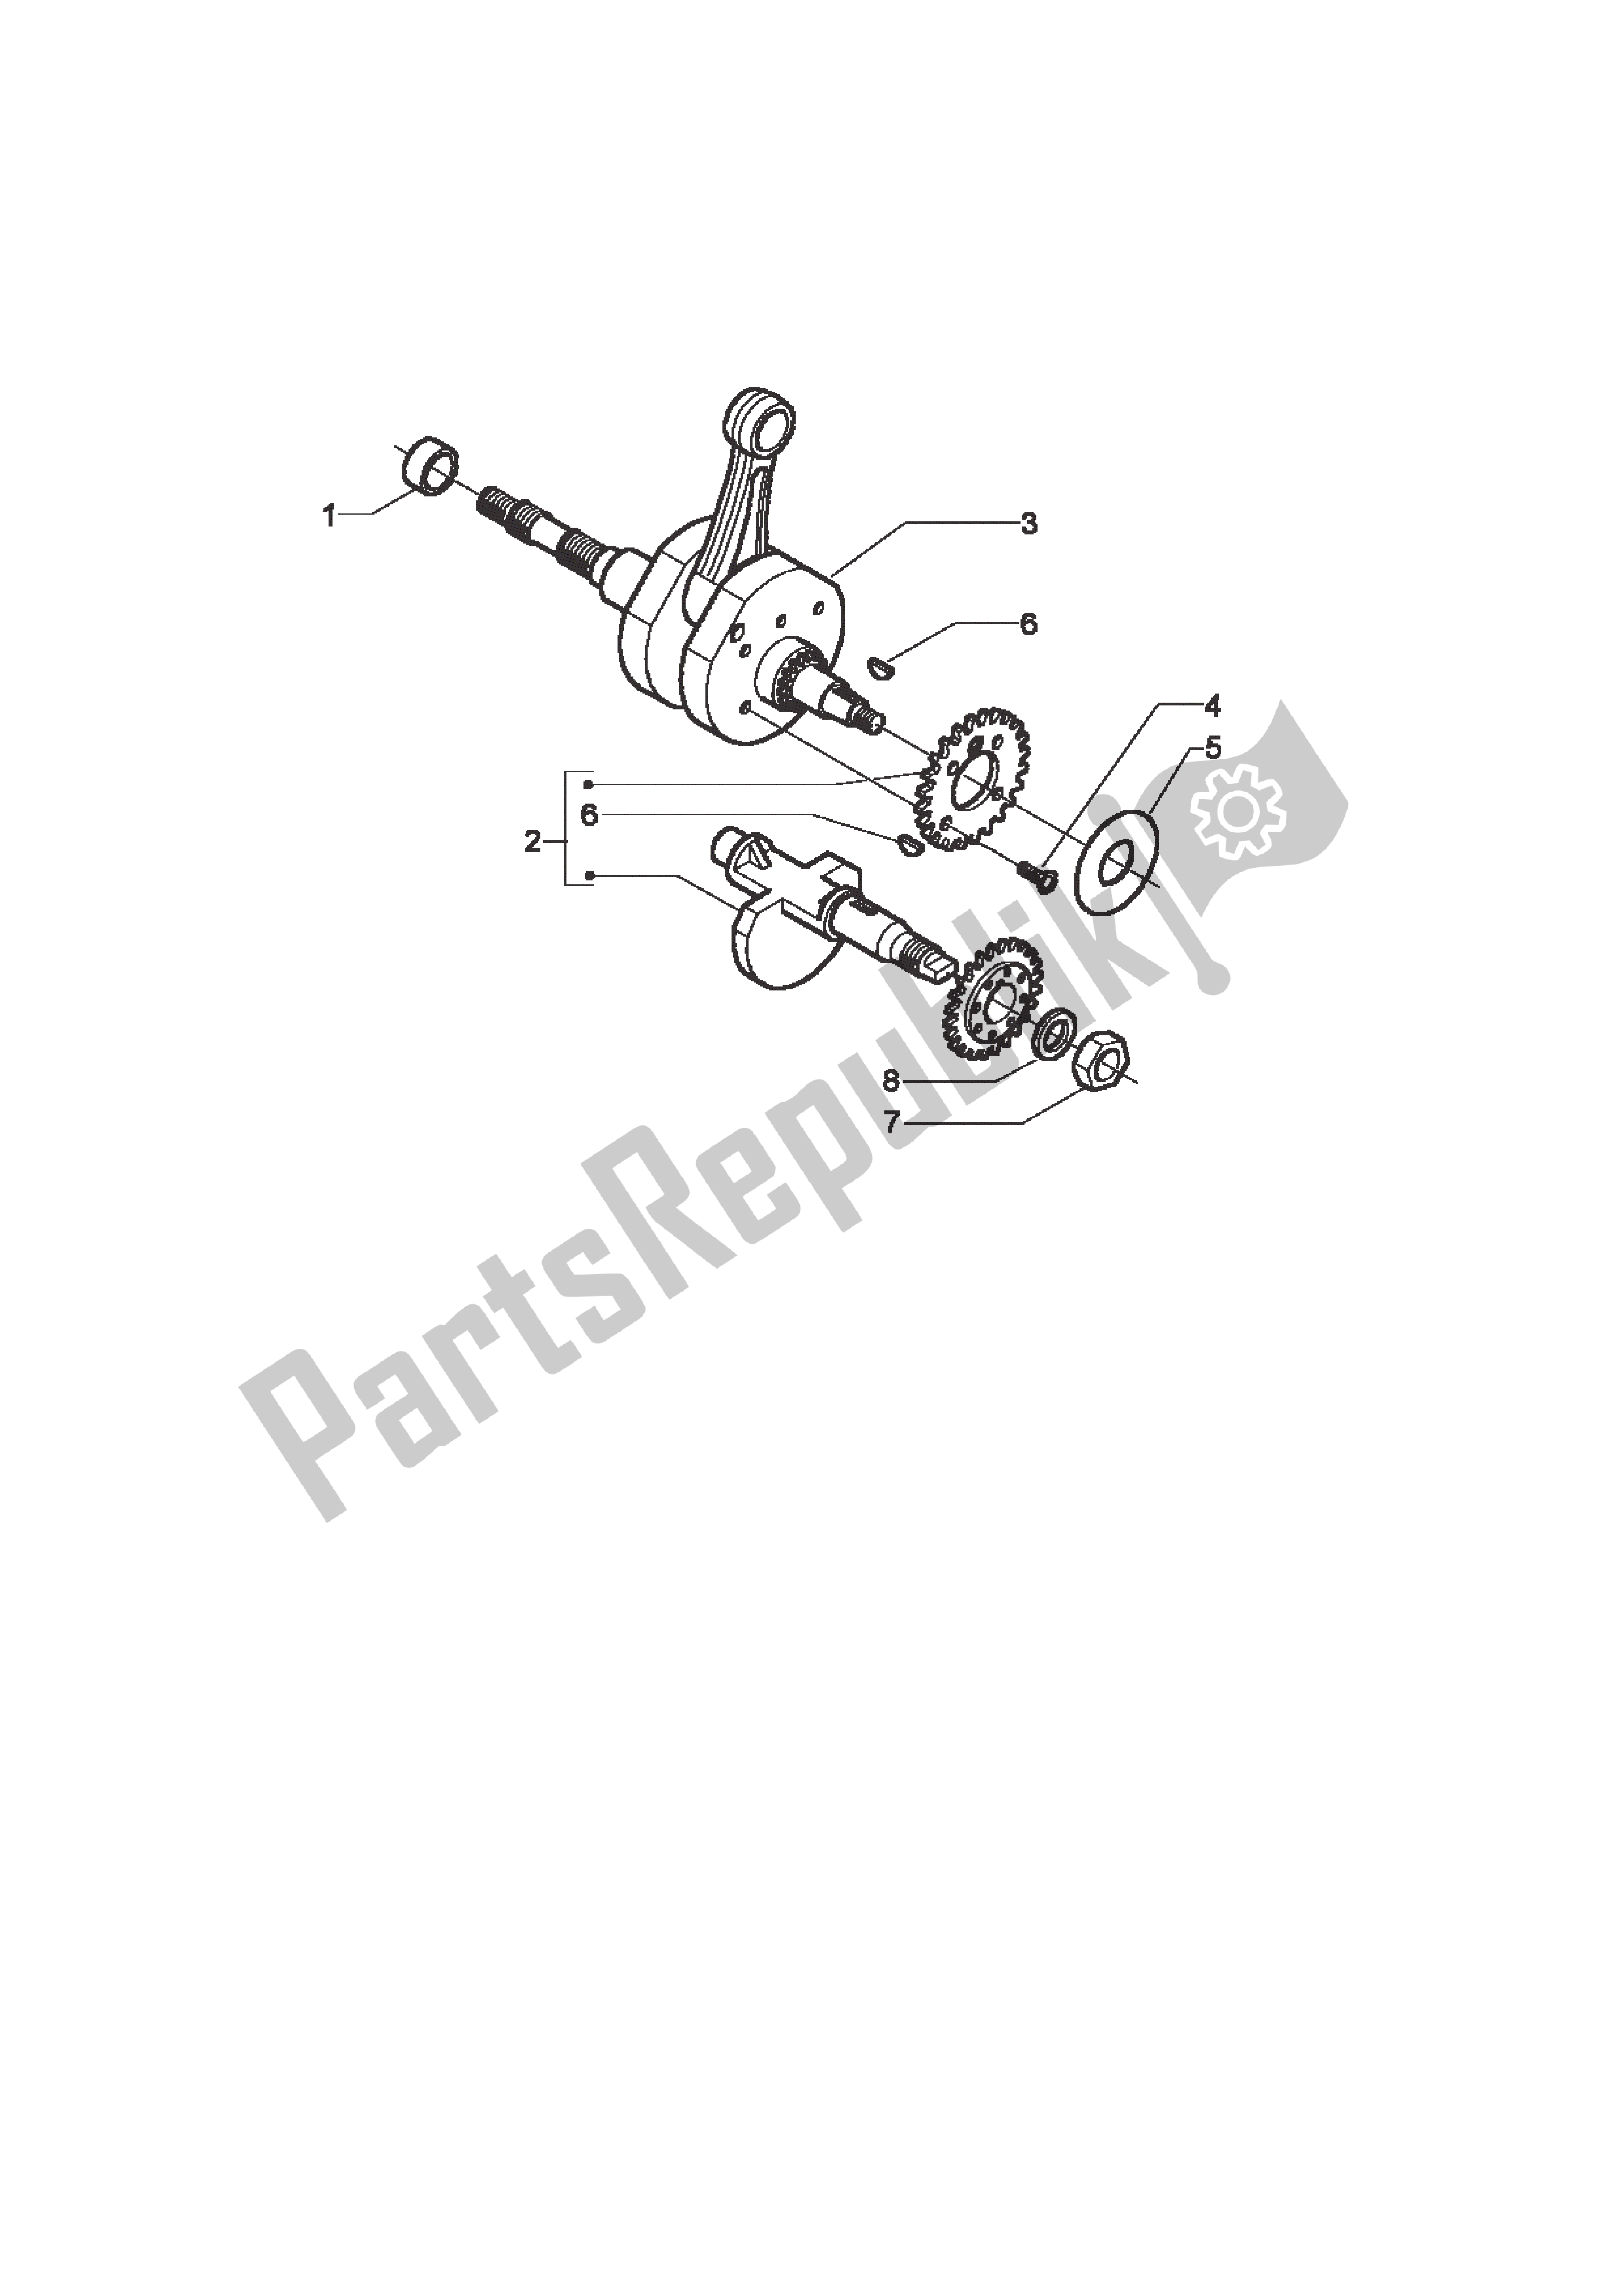 All parts for the Crankshaft of the Piaggio X9 500 2003 - 2004